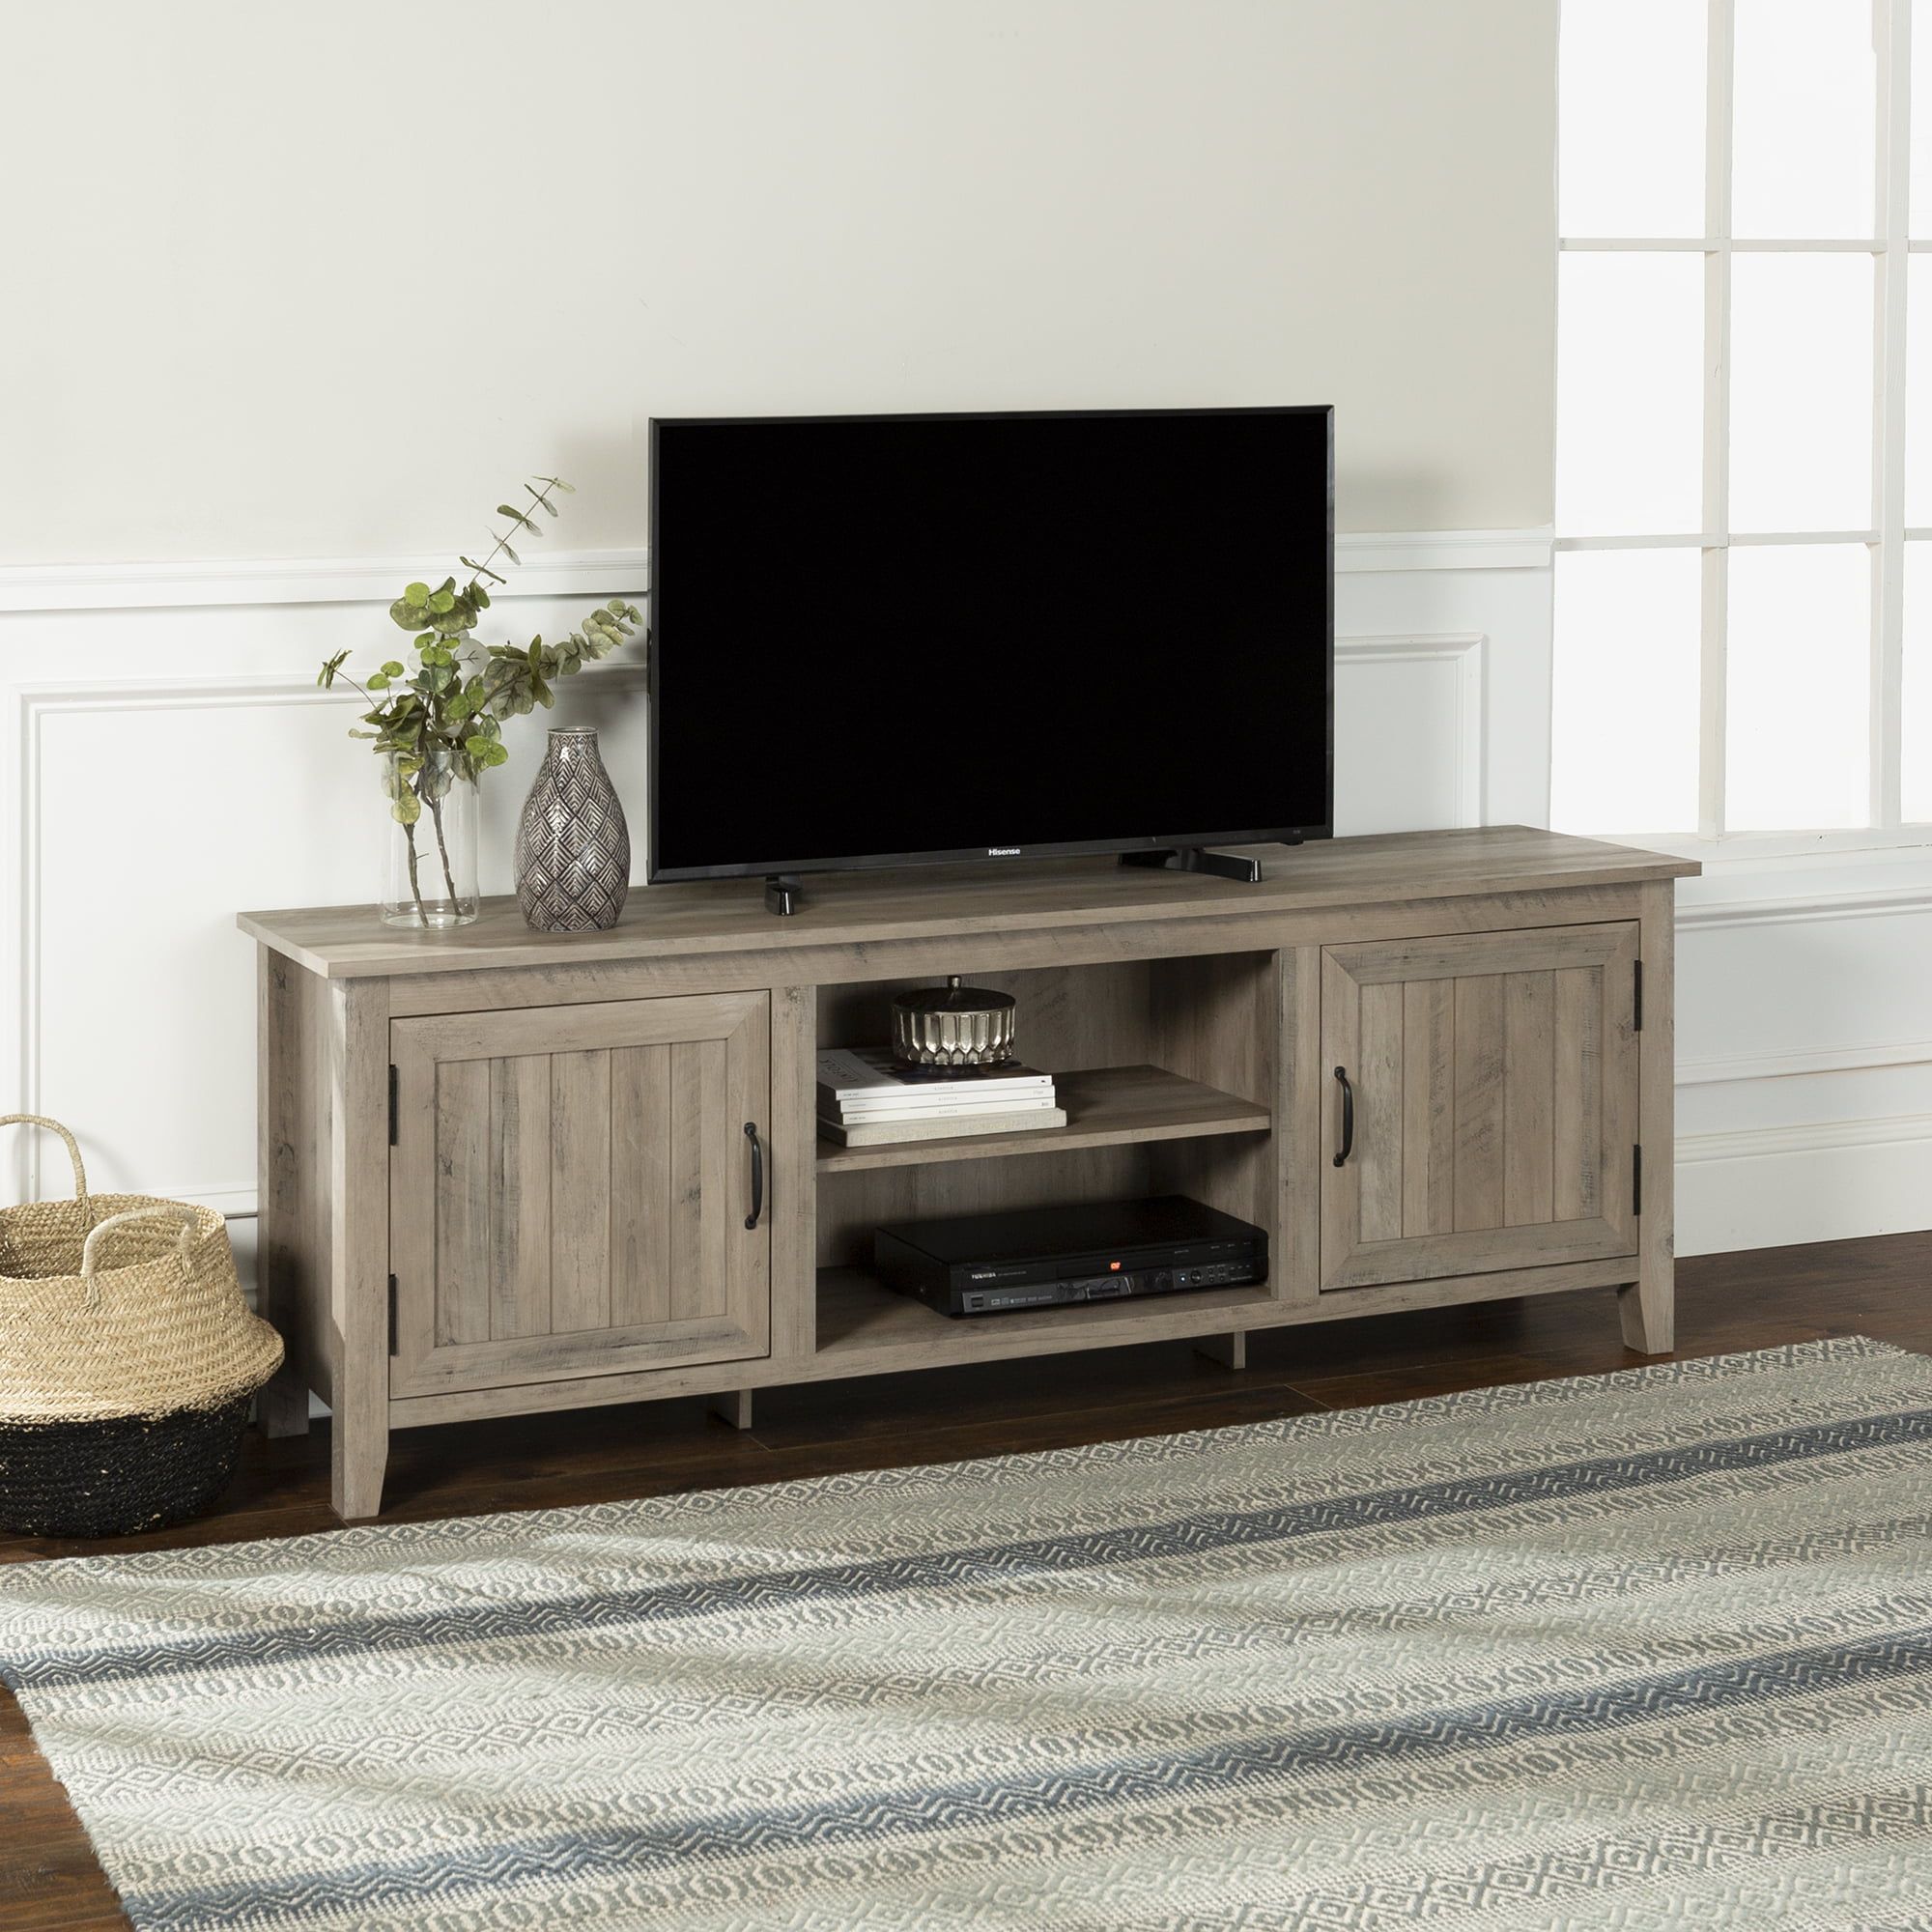 Manor Park Modern Farmhouse Tv Stand For Tvs Up To 80", Grey Wash Intended For Farmhouse Stands For Tvs (Gallery 18 of 20)